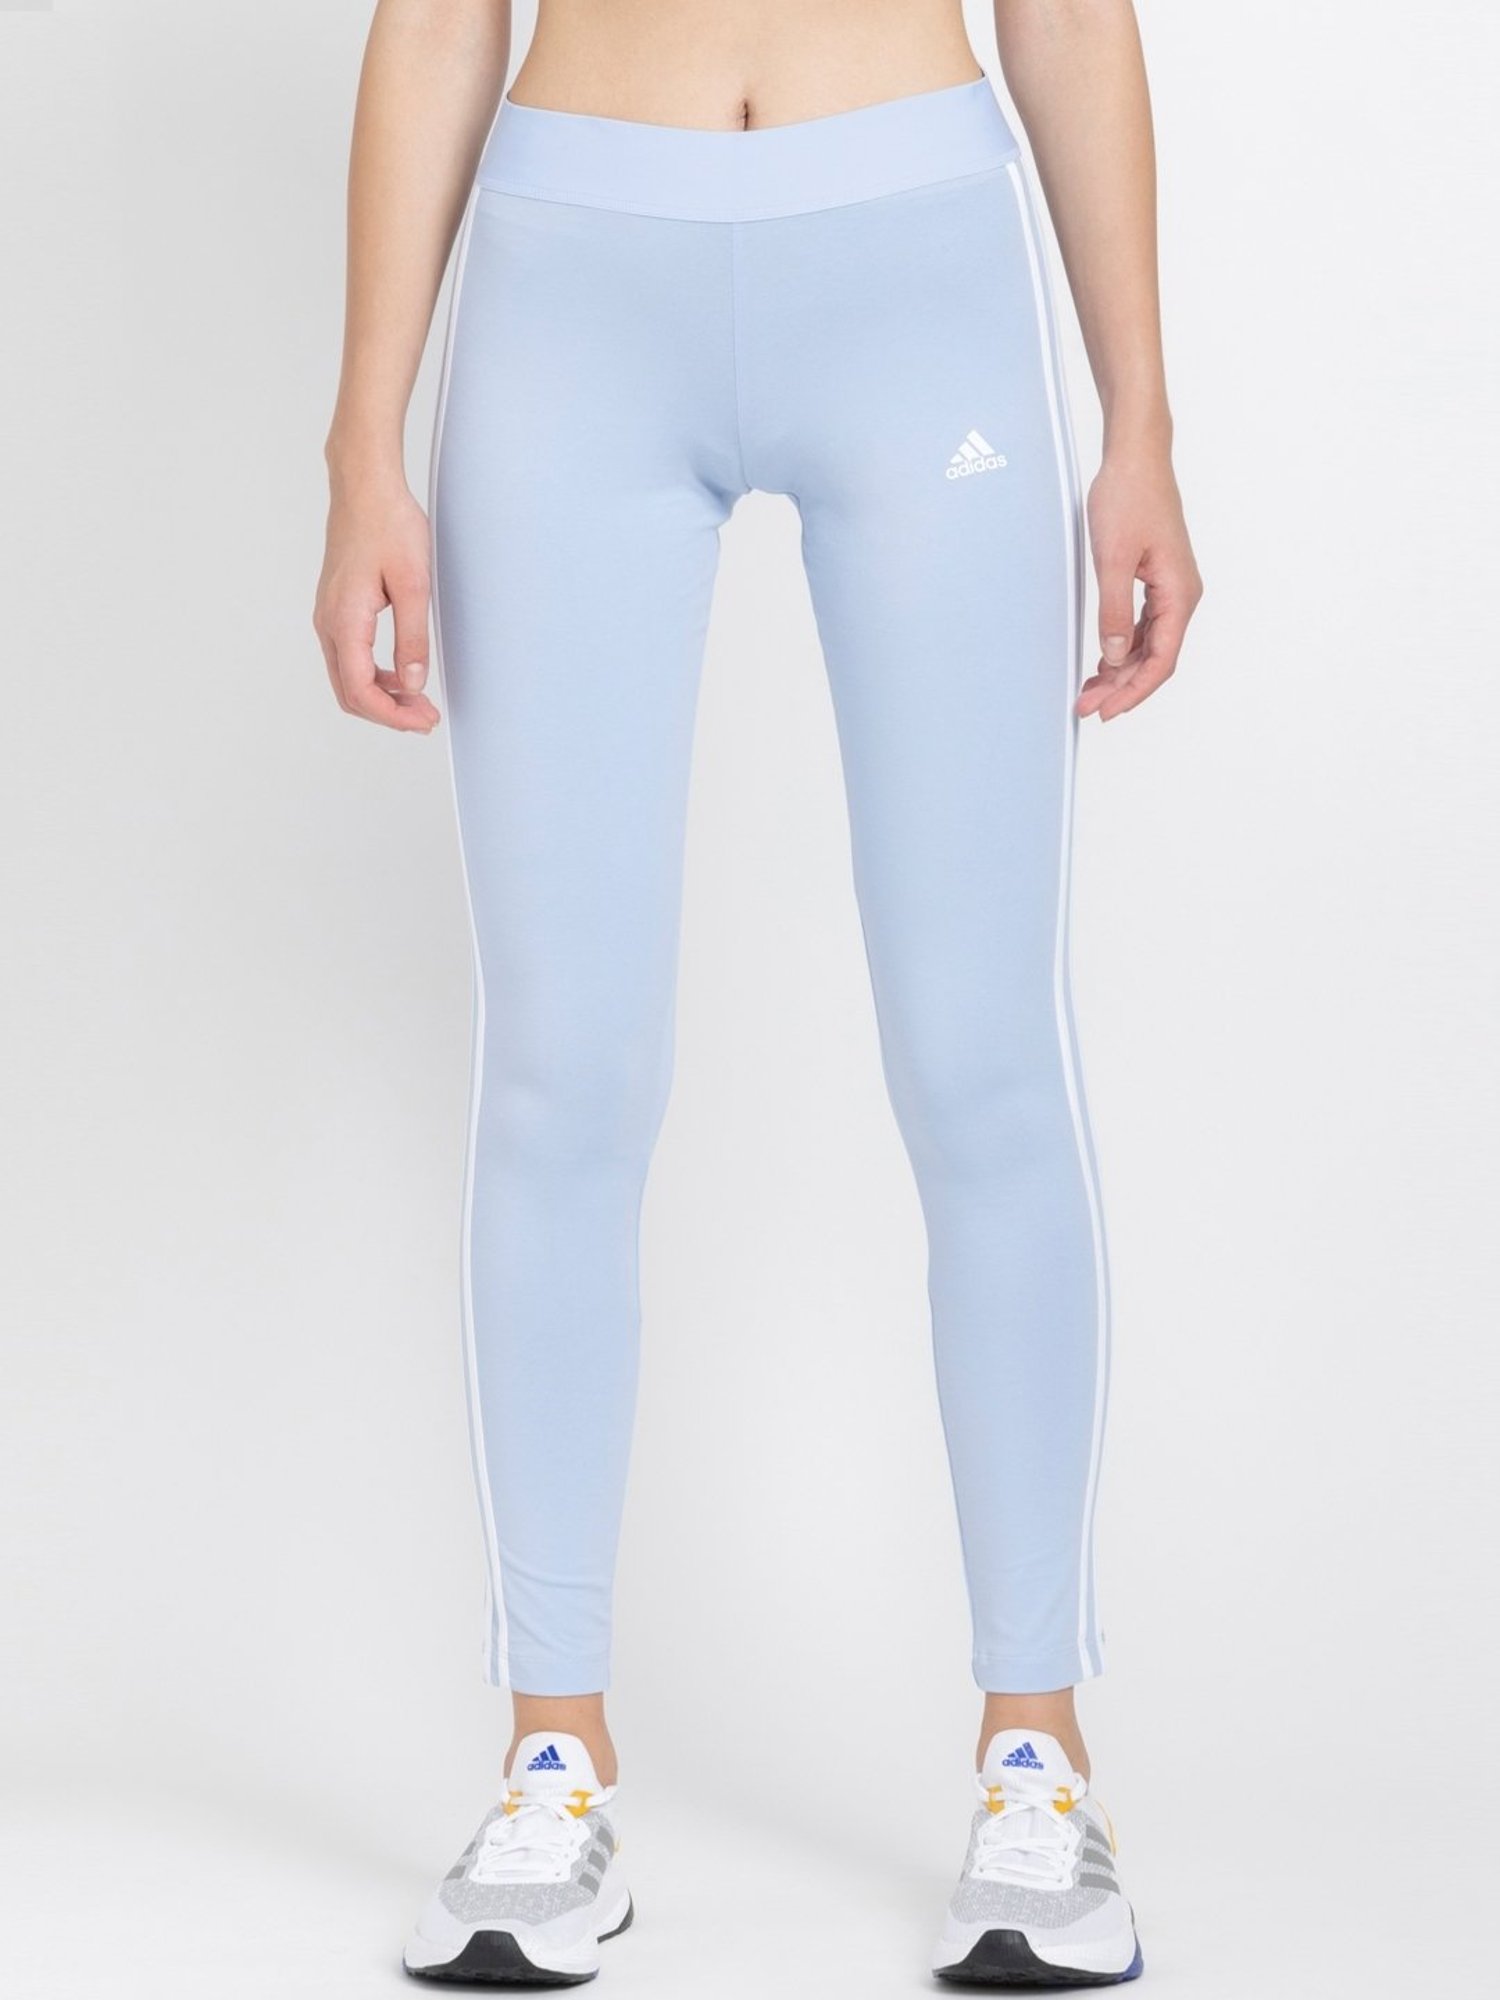 Adidas Blue Tights 3041284.htm - Buy Adidas Blue Tights 3041284.htm online  in India